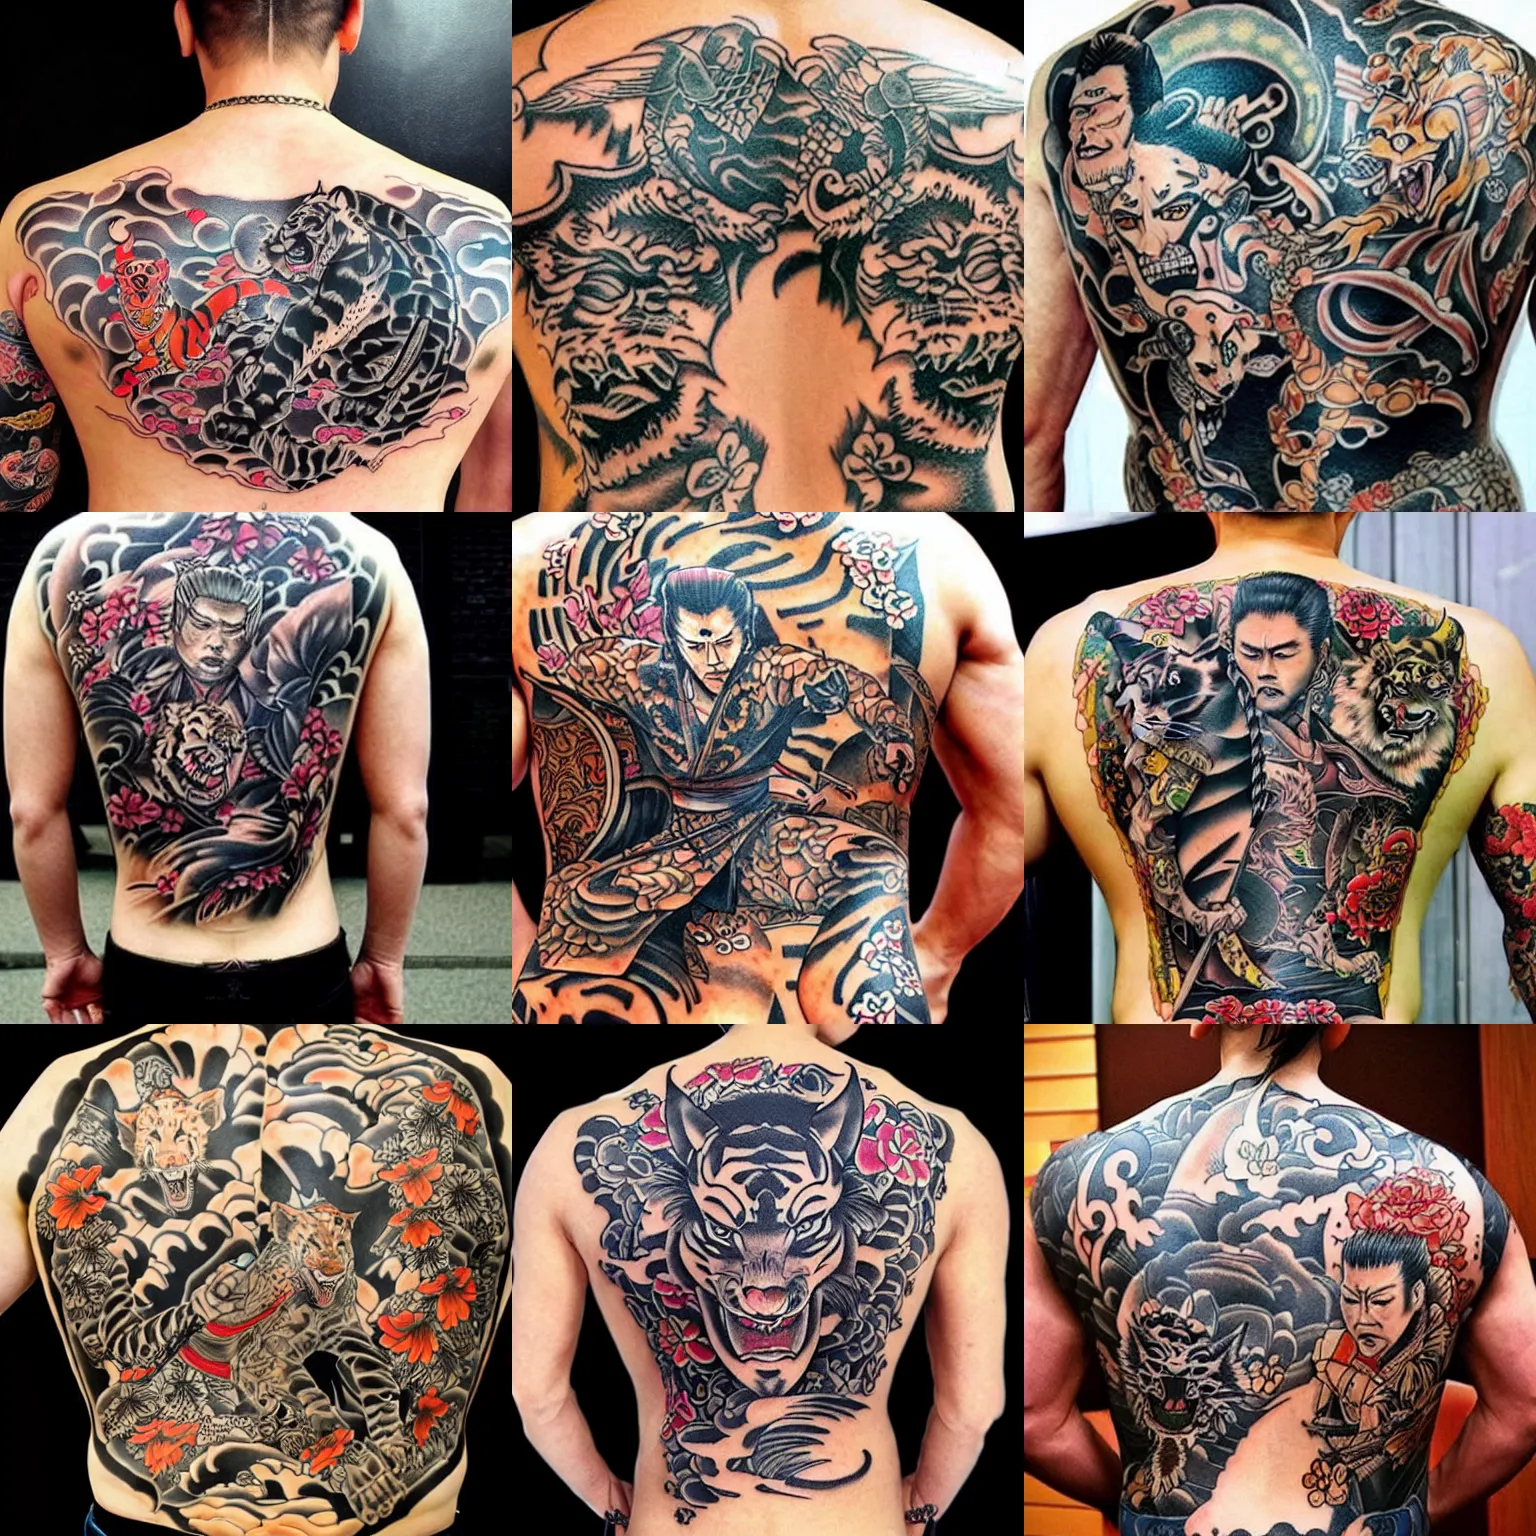 yakuza tattoos on a back with intricate designs with